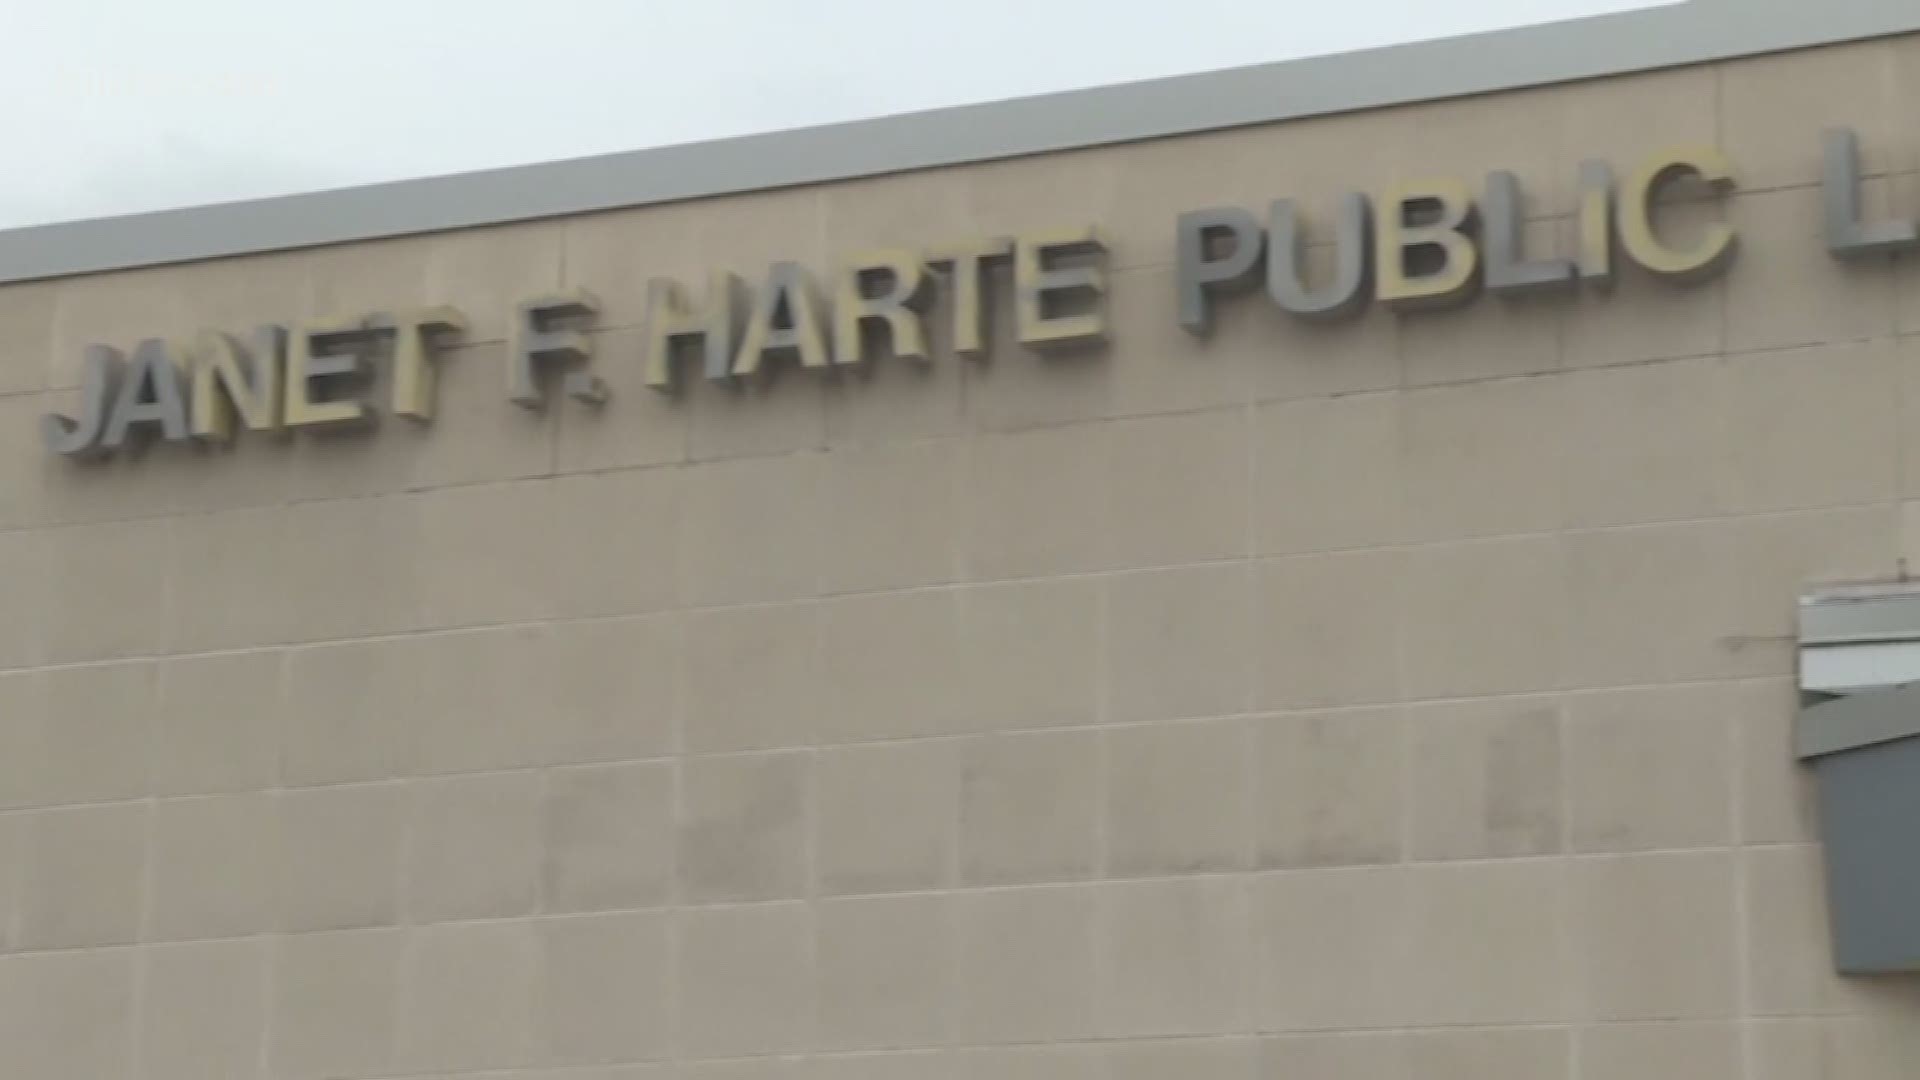 A Corpus Christi Girl Scout troop took to City Hall Tuesday to protest the operating hours of the Janet Harte Branch Public Library in Flour Bluff.